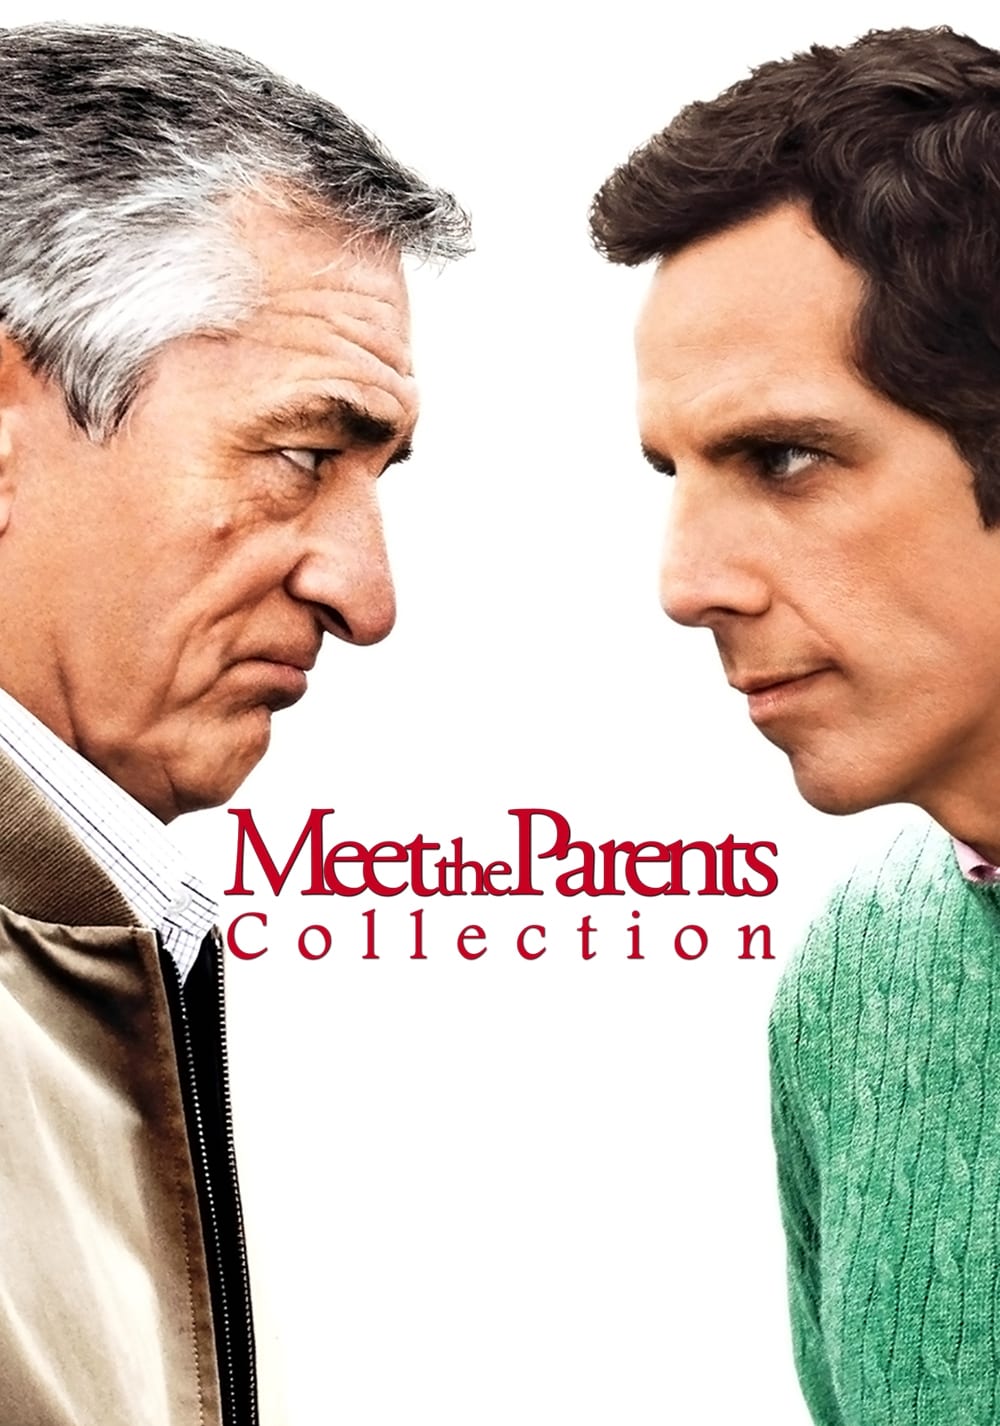 PRM392 MCPoster Meet the Parents Movie Poster Glossy Finish